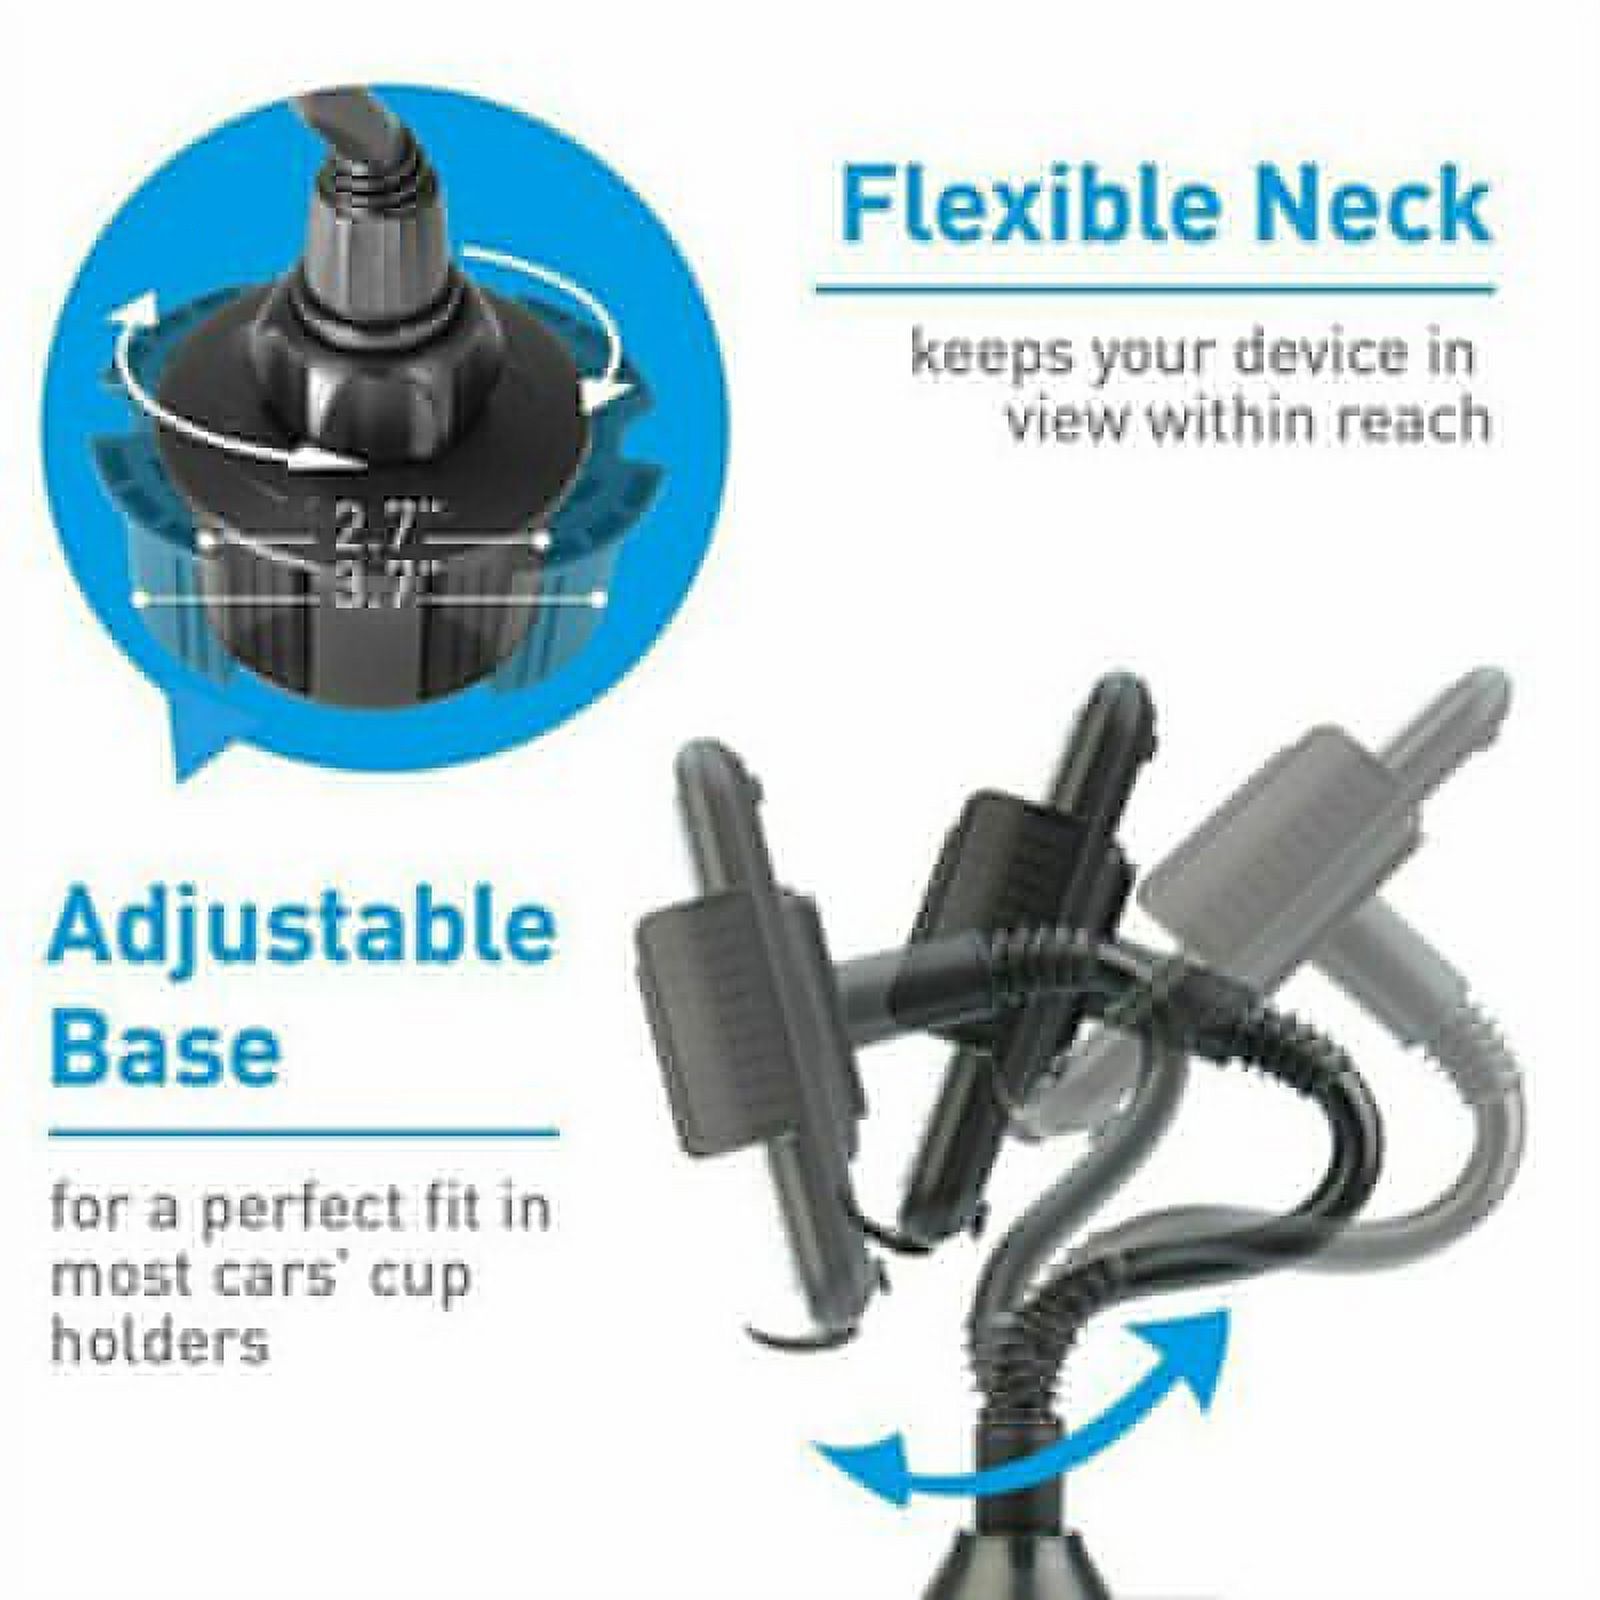 Universal Cup Holder Phone Mount Adjustable Gooseneck Cup Holder Cradle Car Mount for Cell Phone iPhone Xs/XS Max/X/8/7 Plus/Galaxy - image 4 of 4